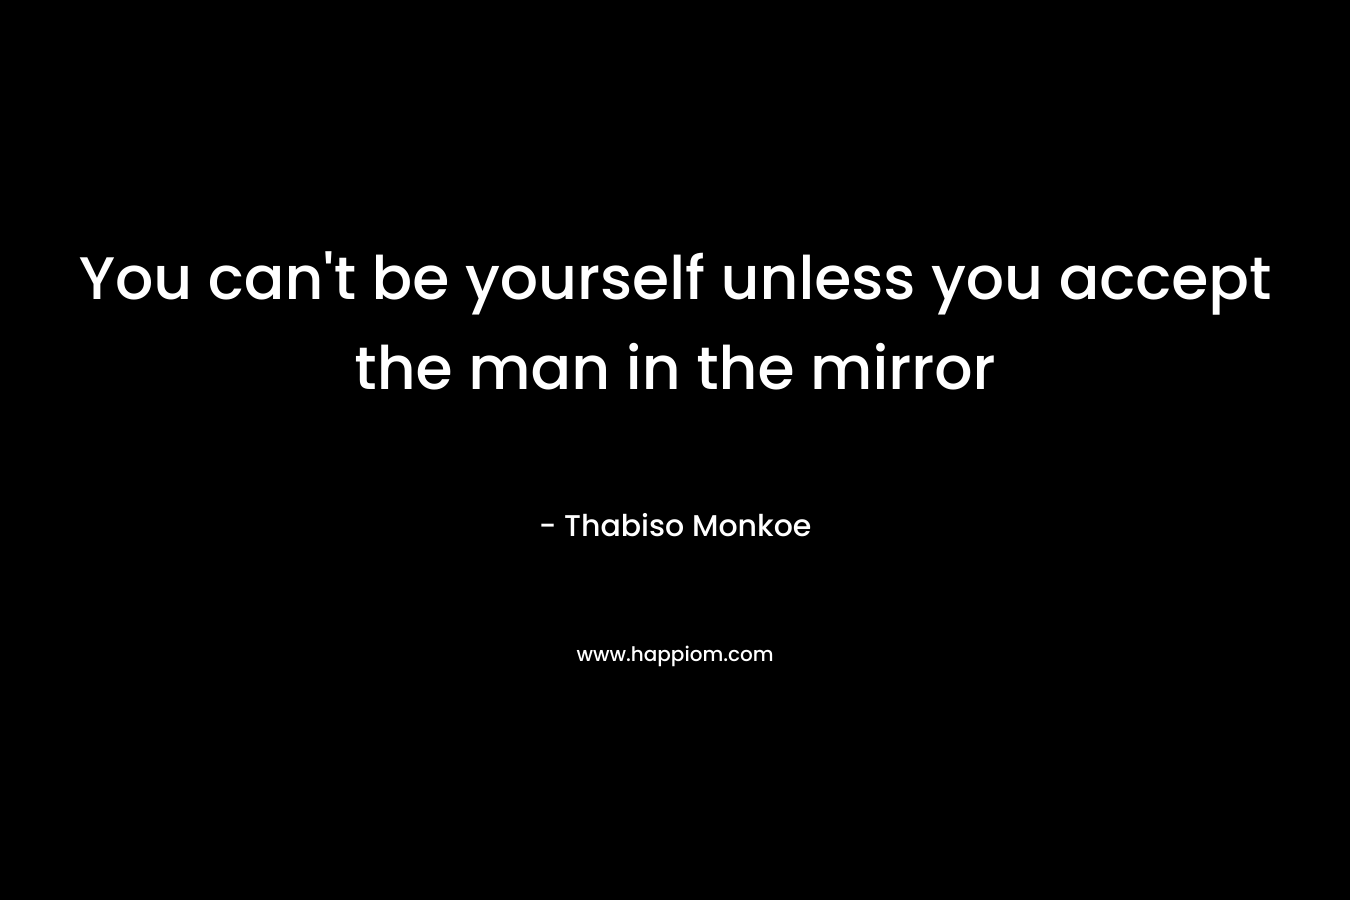 You can't be yourself unless you accept the man in the mirror